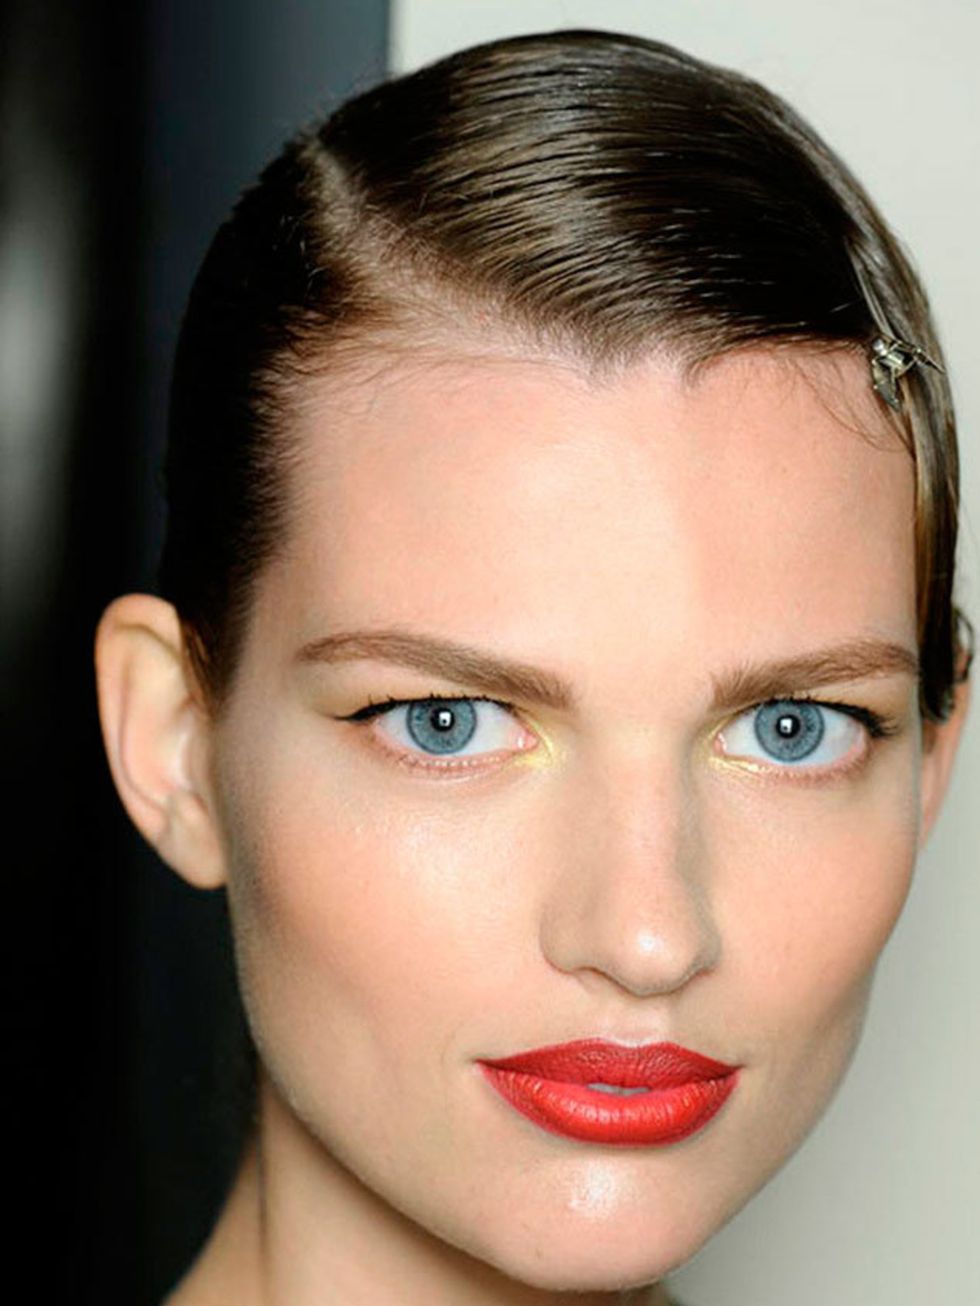 <p><a href="http://www.elleuk.com/star-style/celebrity-beauty/celeb-make-up/best-celebrity-red-lips">A red lip</a> was one of the most iconic 1920s make-up looks. Think raspberry, rose, deep plum and orangey tones. Backstage at<a href="http://www.elleuk.c